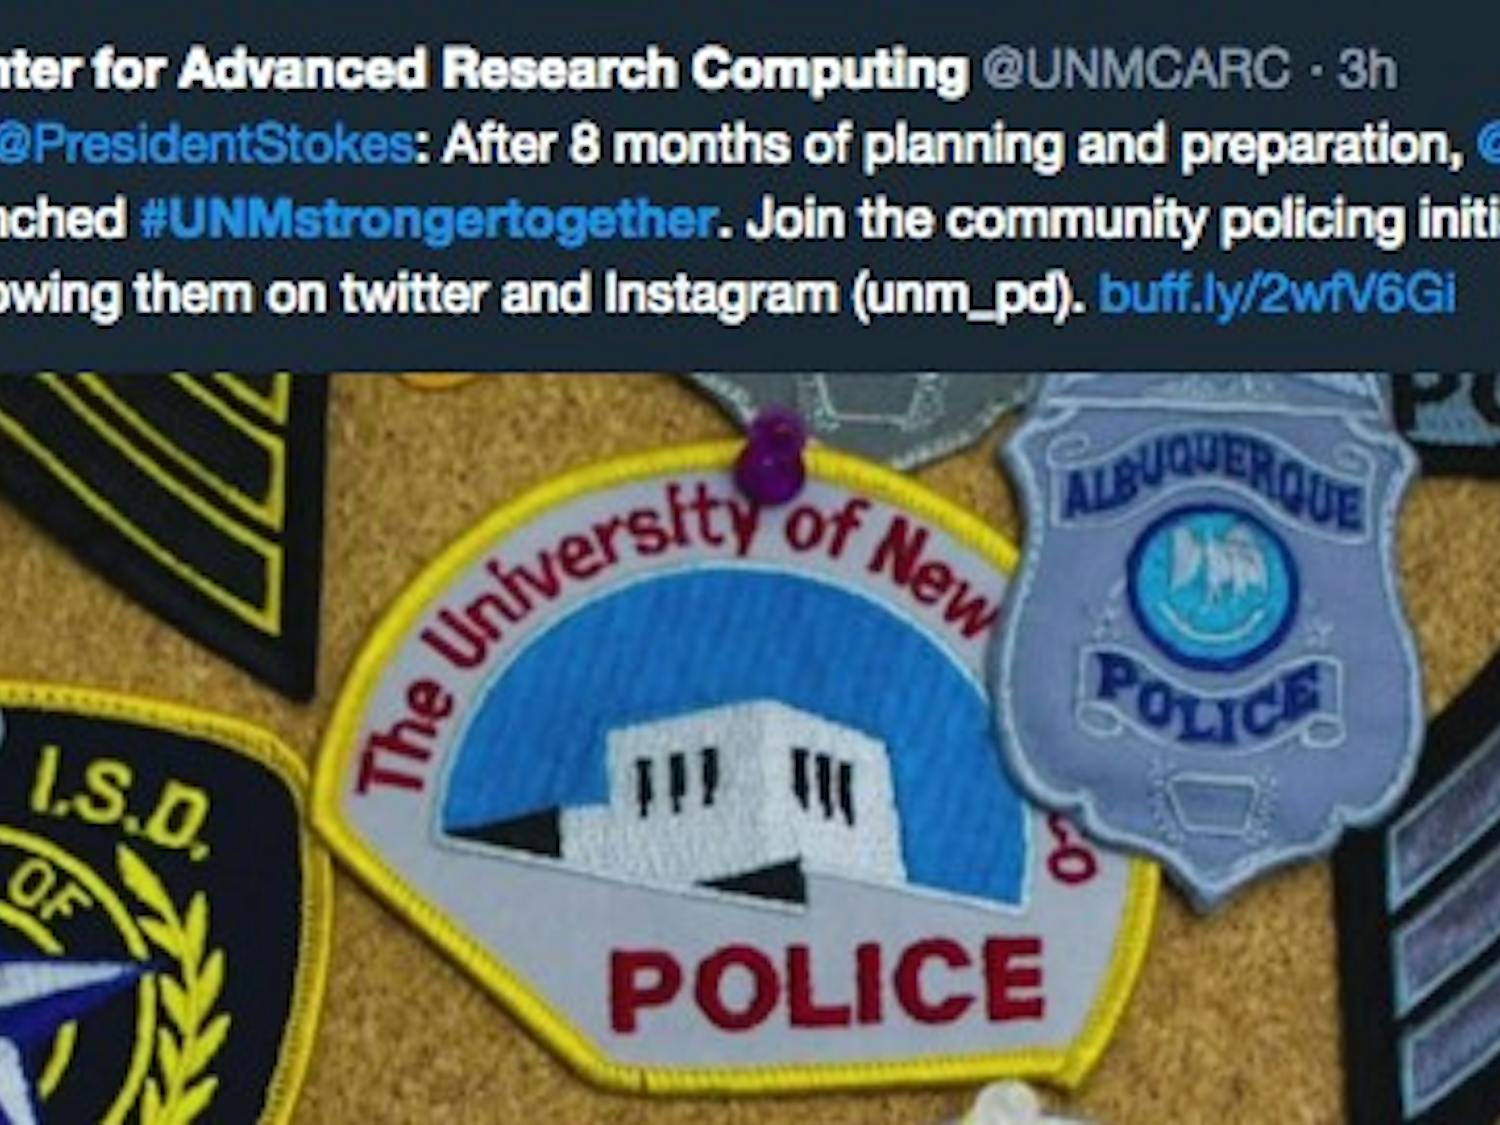 Screenshot from a tweet by the Center for Advanced Research Computing, image from KRQE 13.